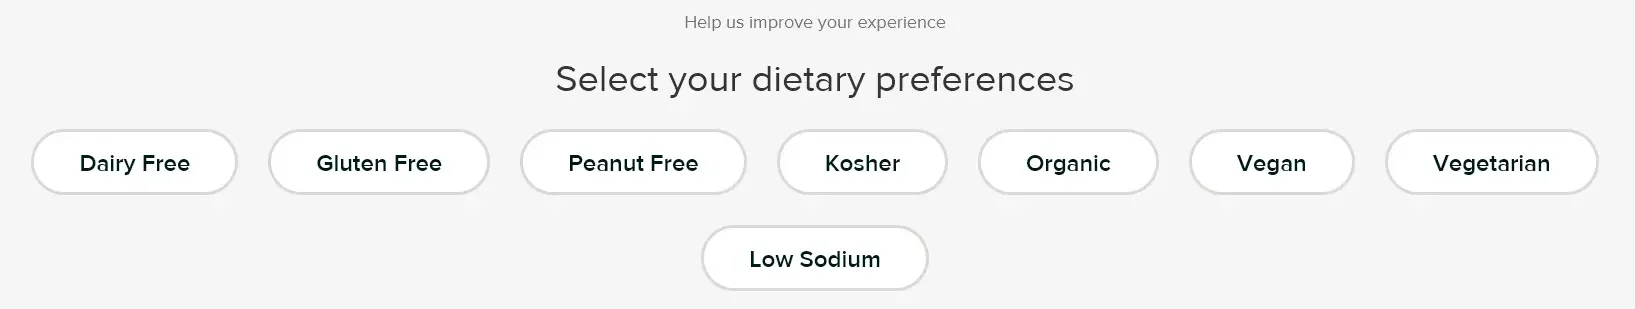 "select your dietary preferences"